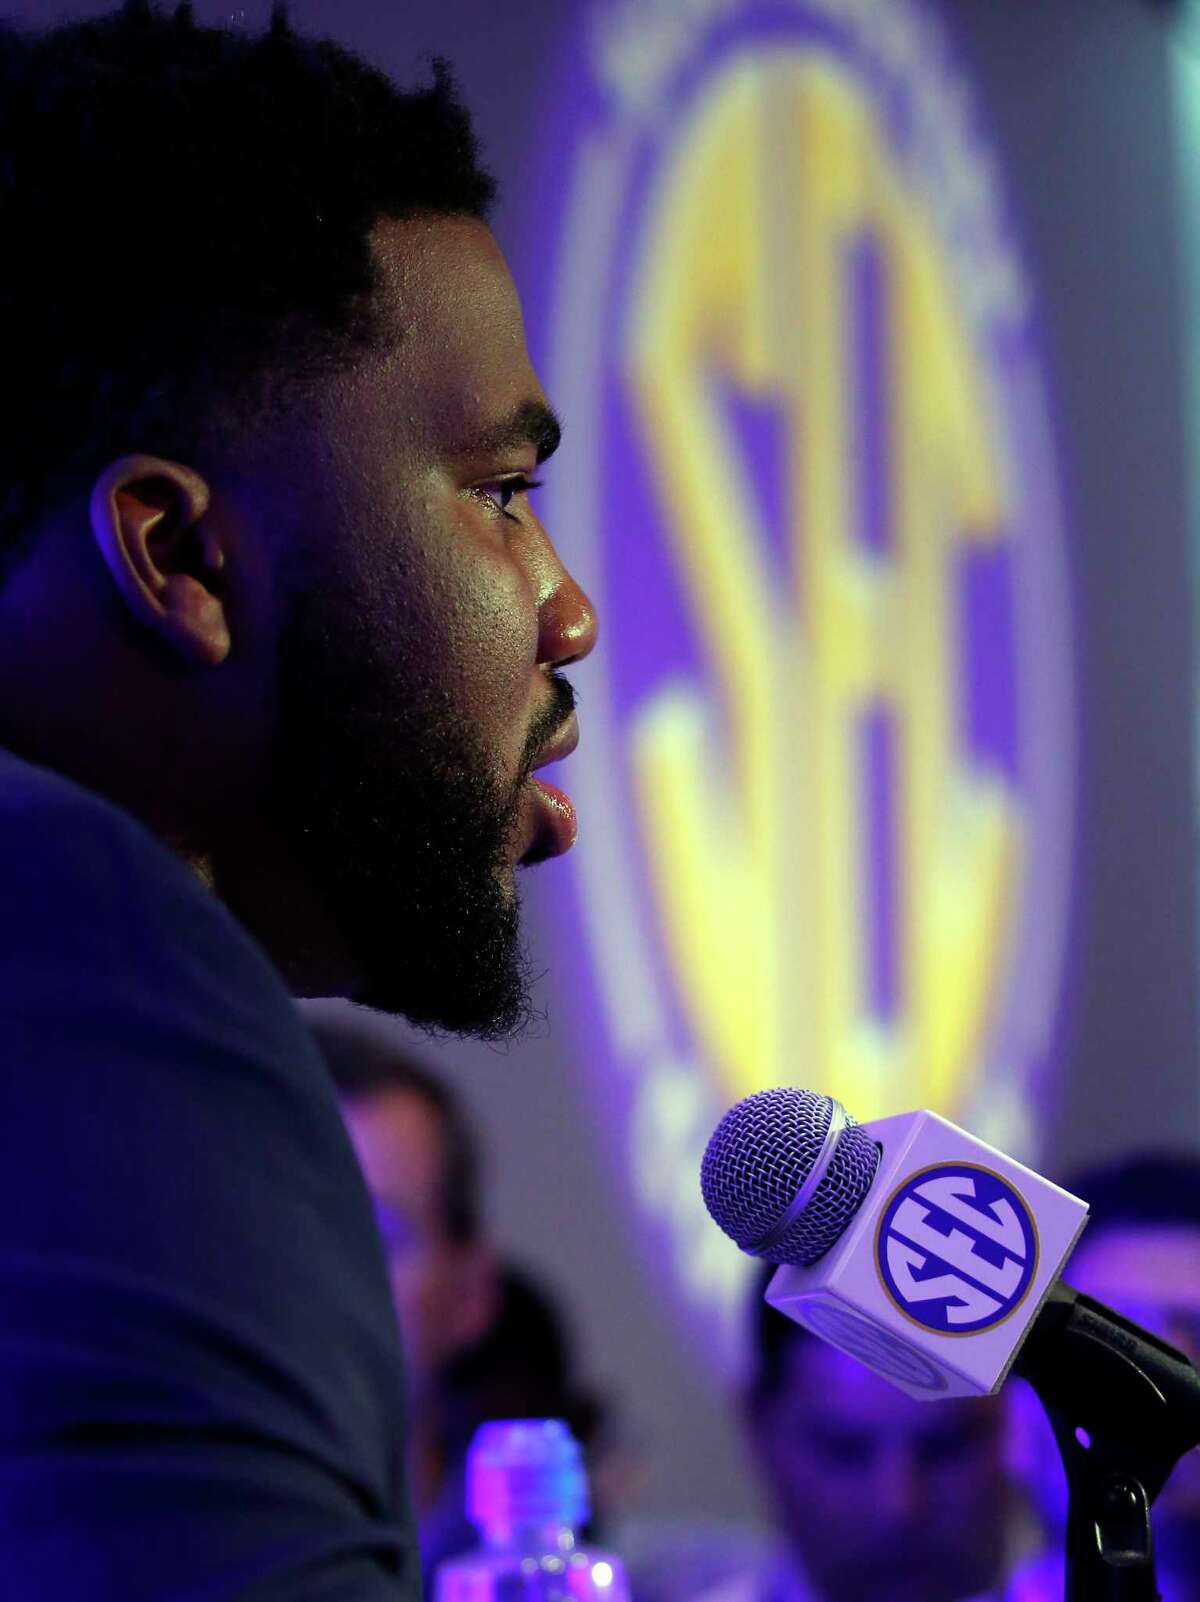 Florida NCAA college player Martez Ivey speaks during the Southeastern Conference's annual media gathering, Tuesday, July 11, 2017, in Hoover, Ala. (AP Photo/Butch Dill)